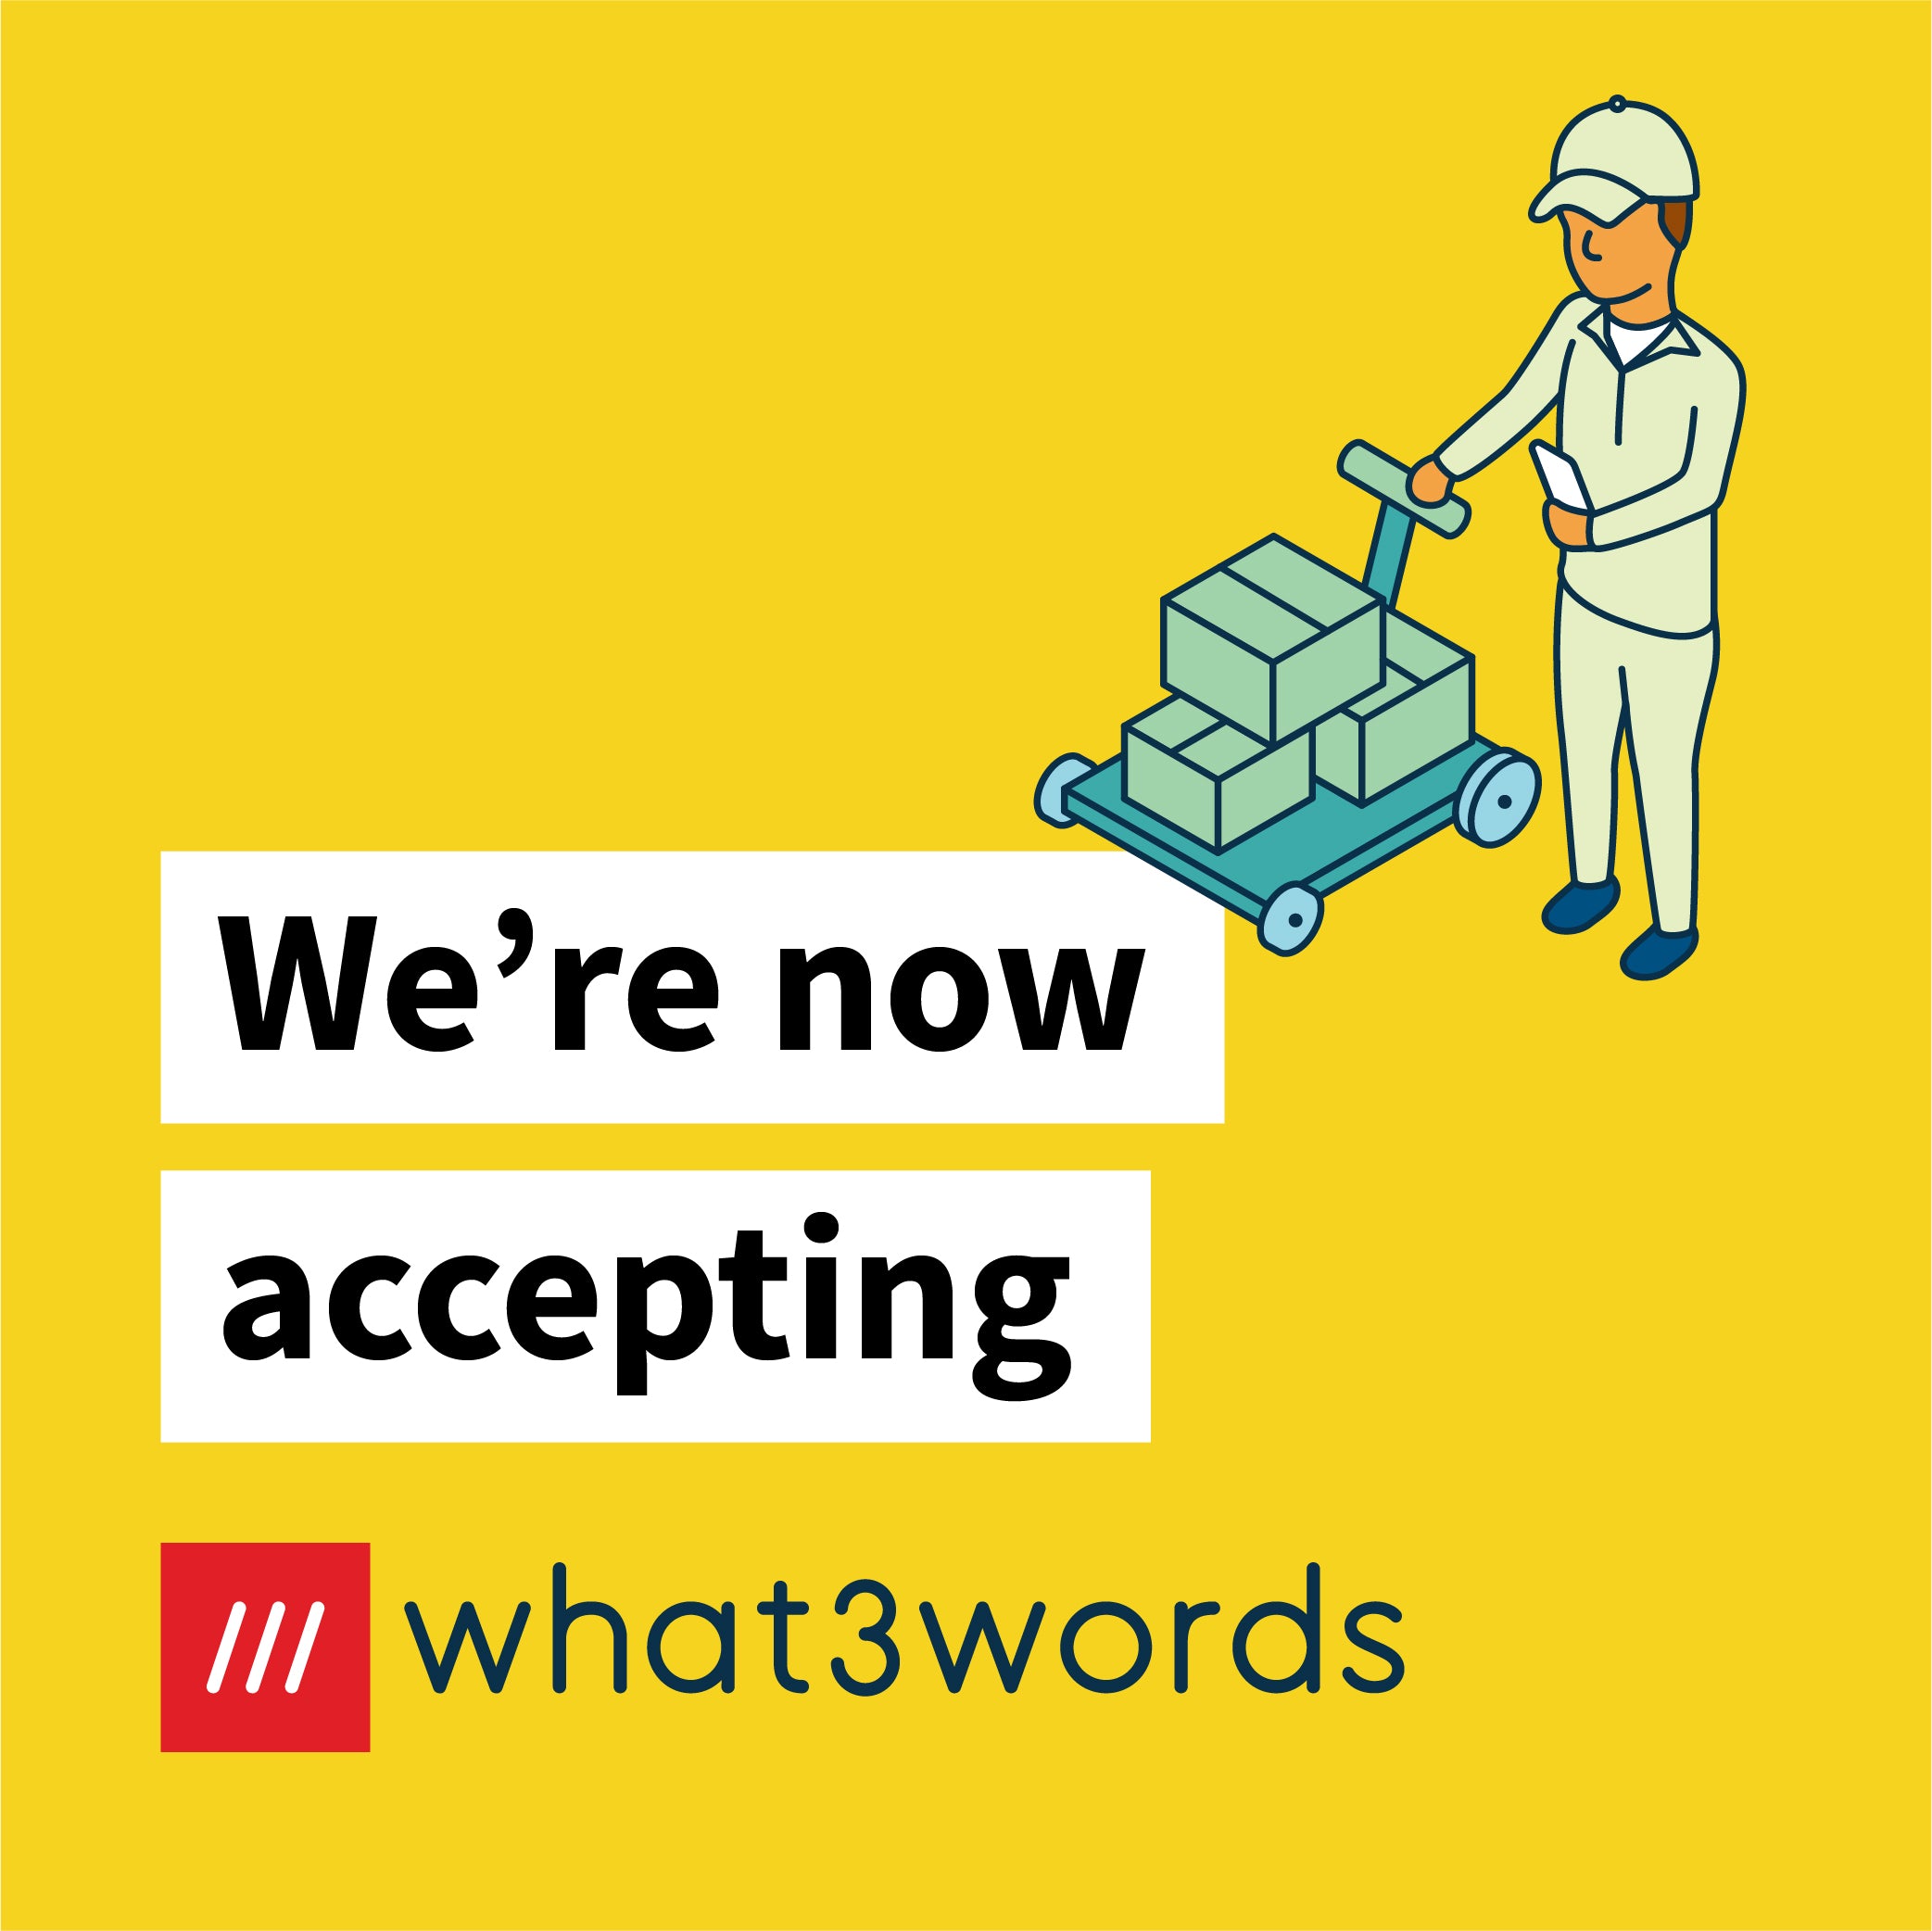 We’re accepting what3words so you can get faster, more reliable deliveries